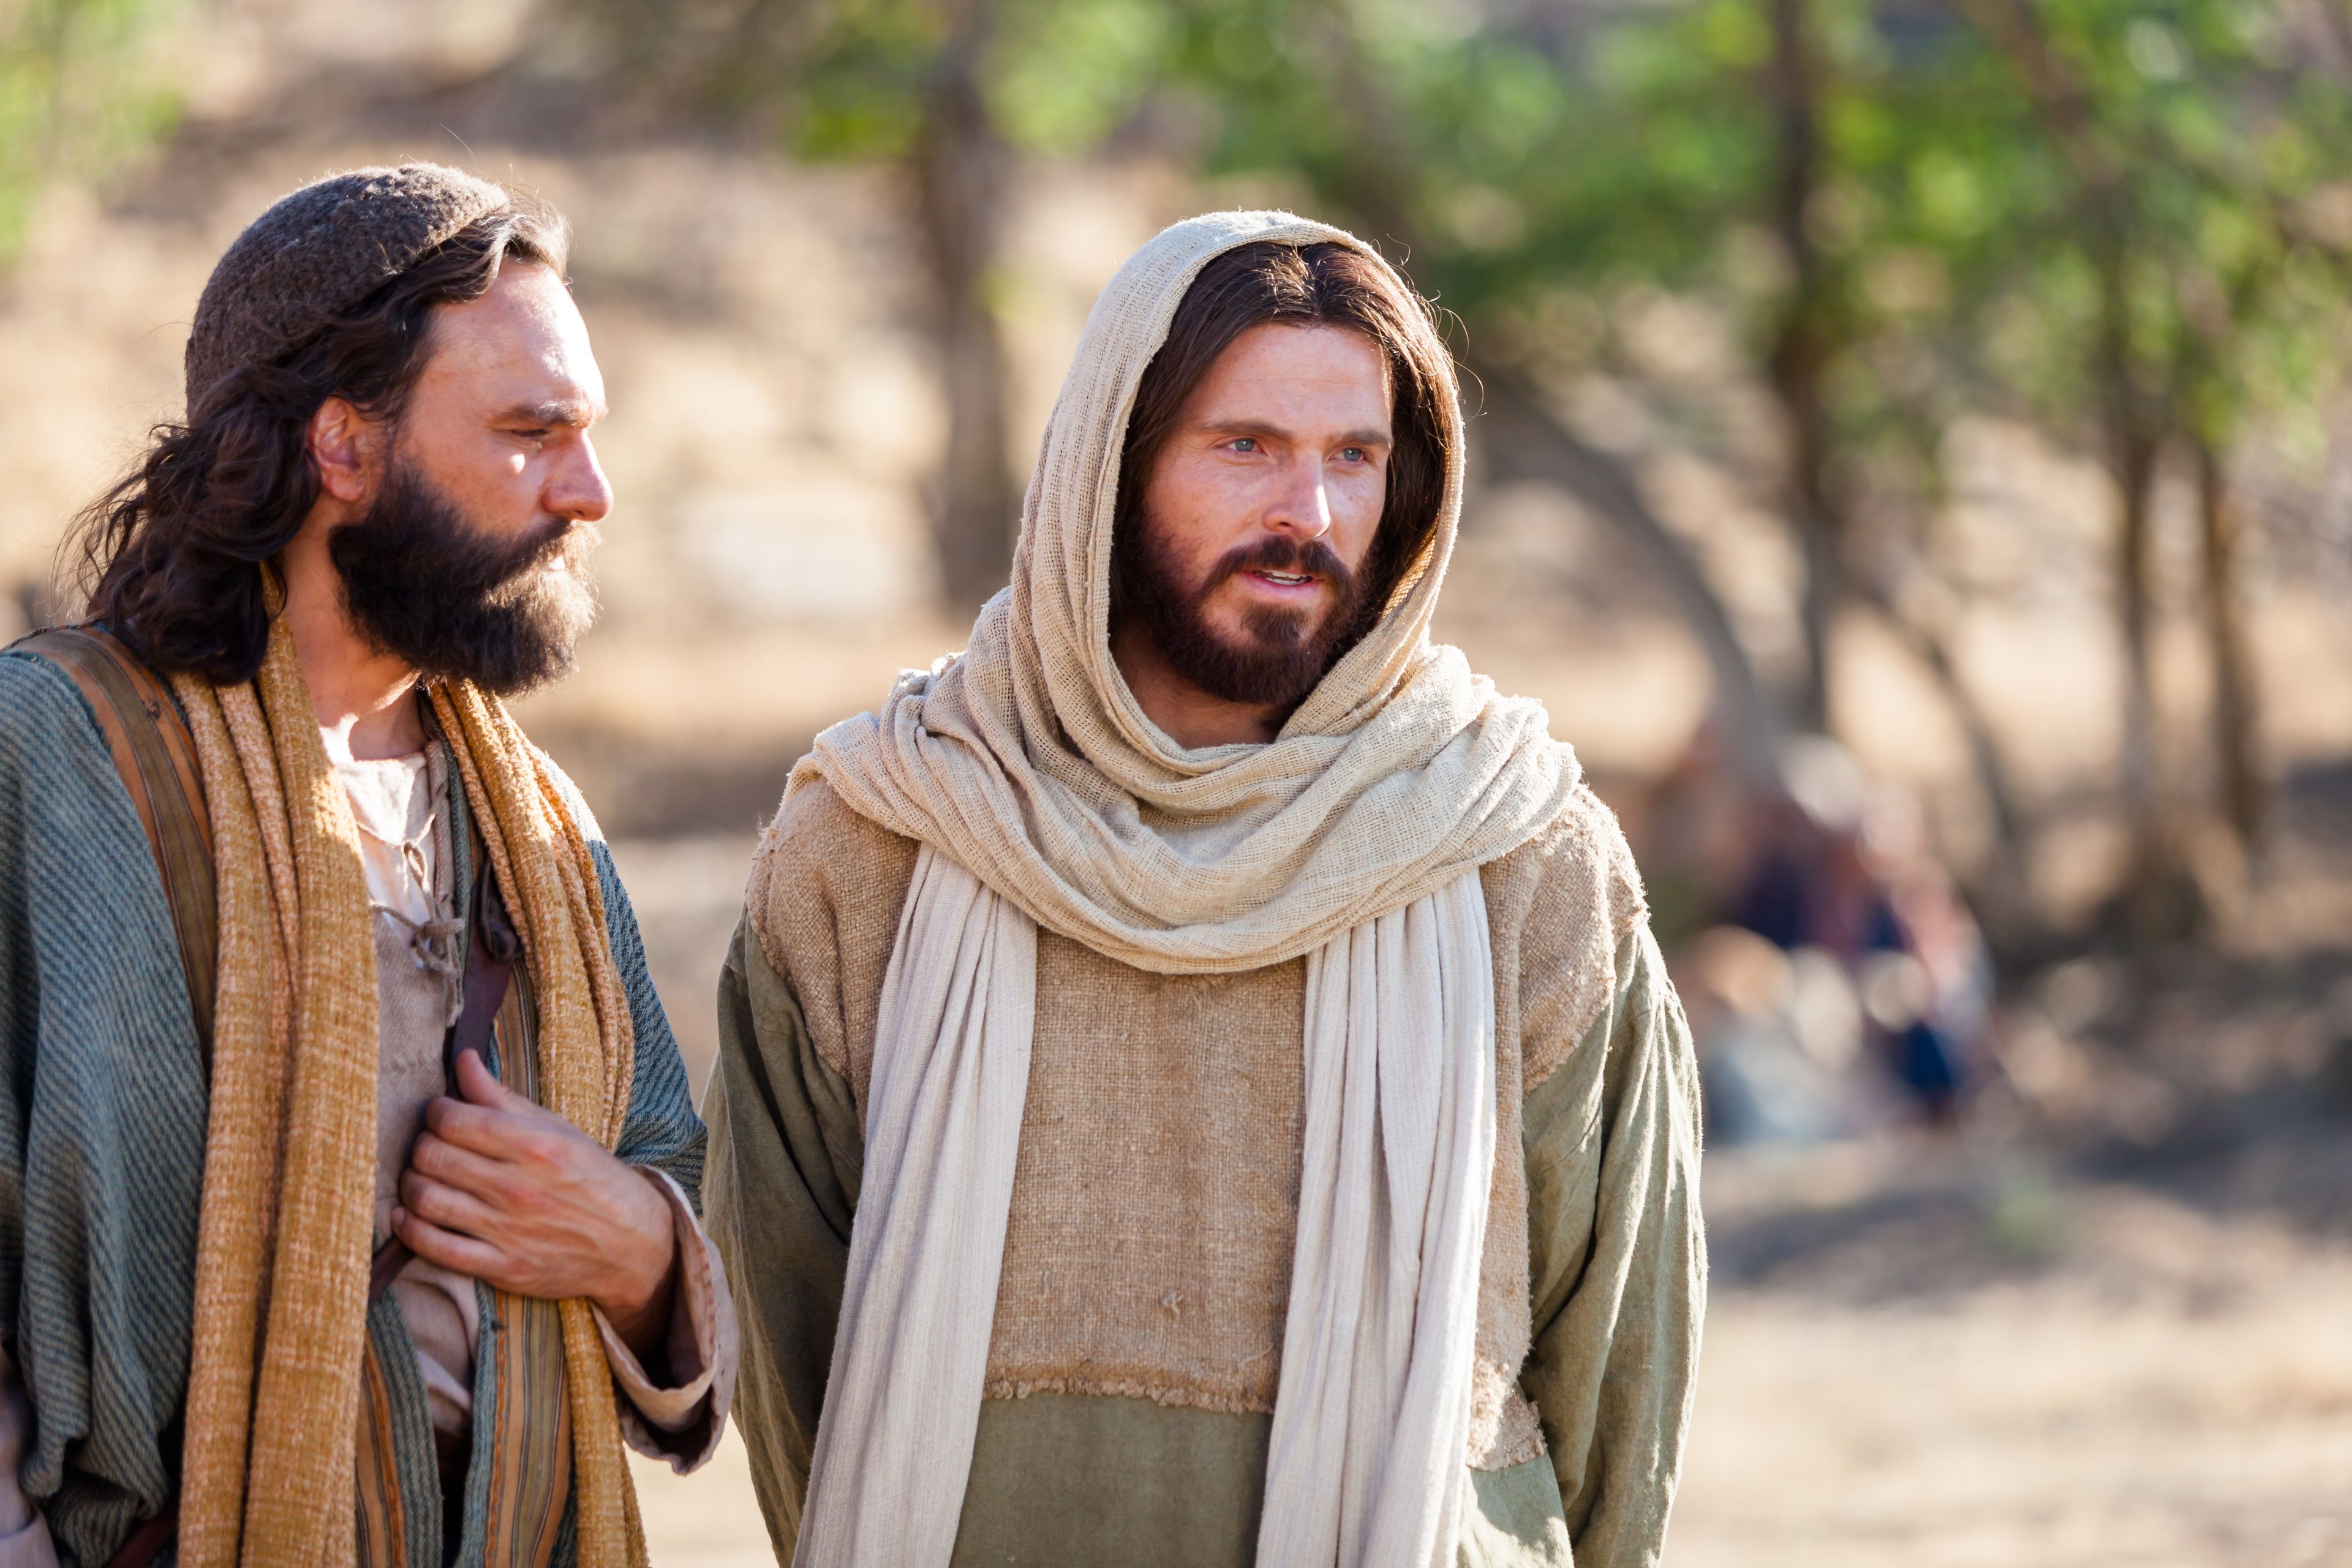 Christ tells Peter to forgive seventy times seven.